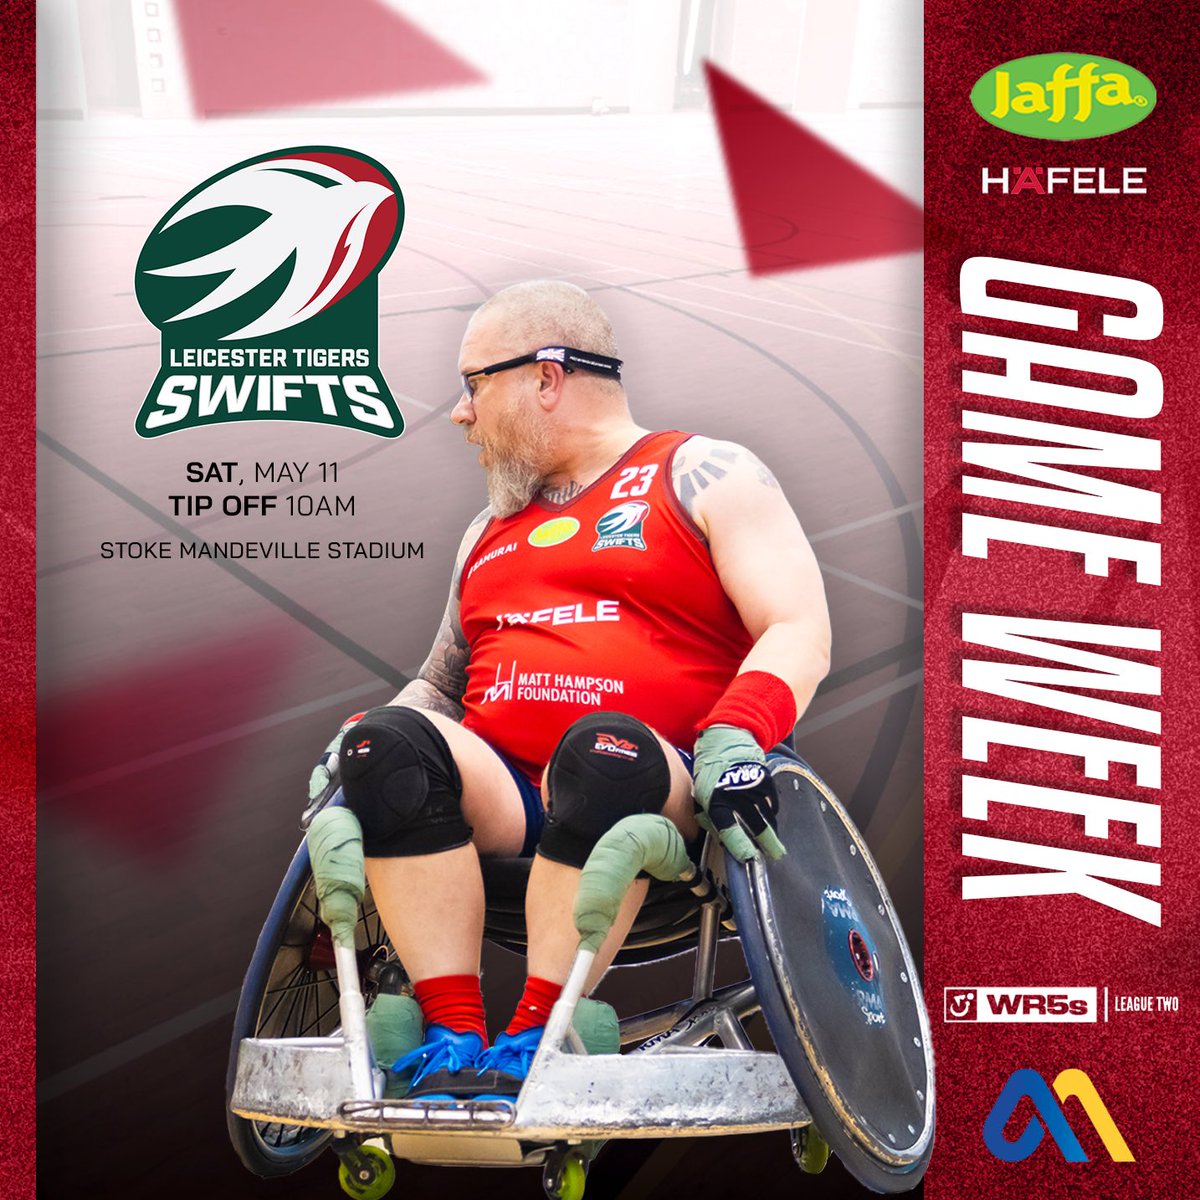 𝑮𝒂𝒎𝒆 𝑾𝒆𝒆𝒌 🏉 After a successful first tournament for both teams, the Leicester Tigers Wheelchair Rugby Team and the Leicester Tigers Swifts gear up for the second fives tournament of the year! tournifyapp.com/live/wr5st22024